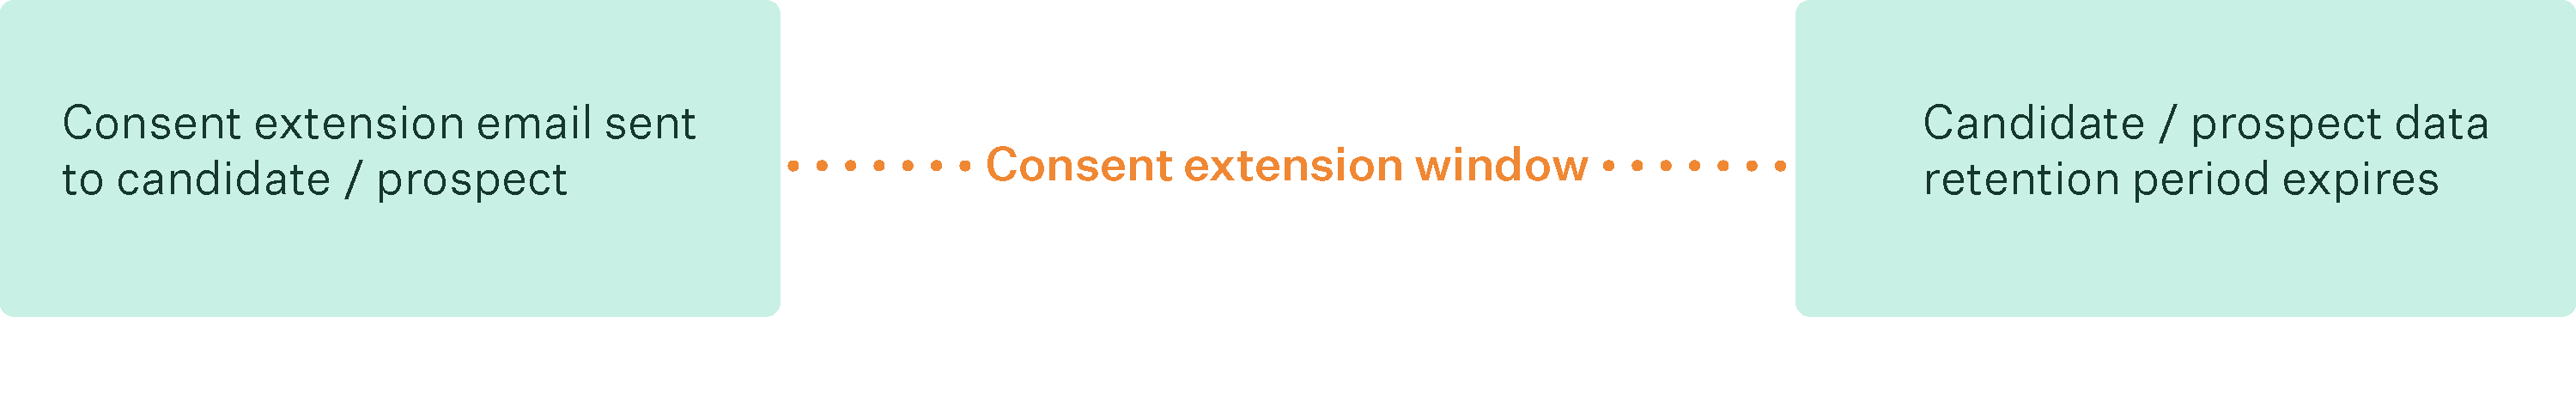 Consent_extension_window_diagram.png